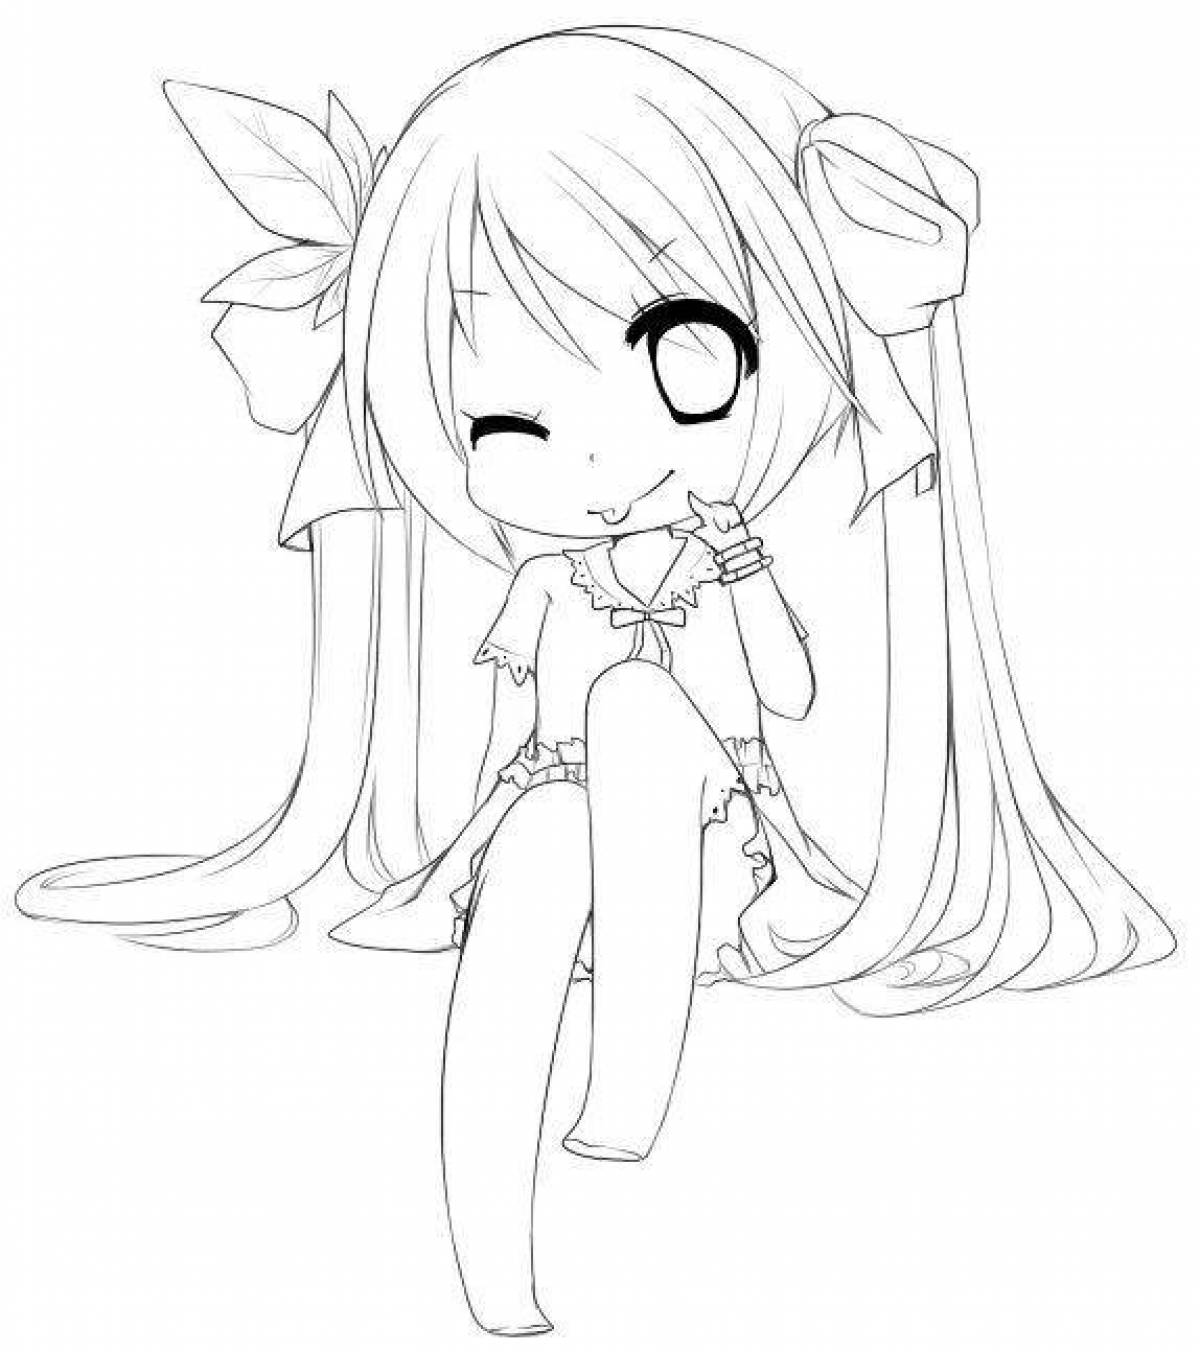 Adorable chibi coloring page